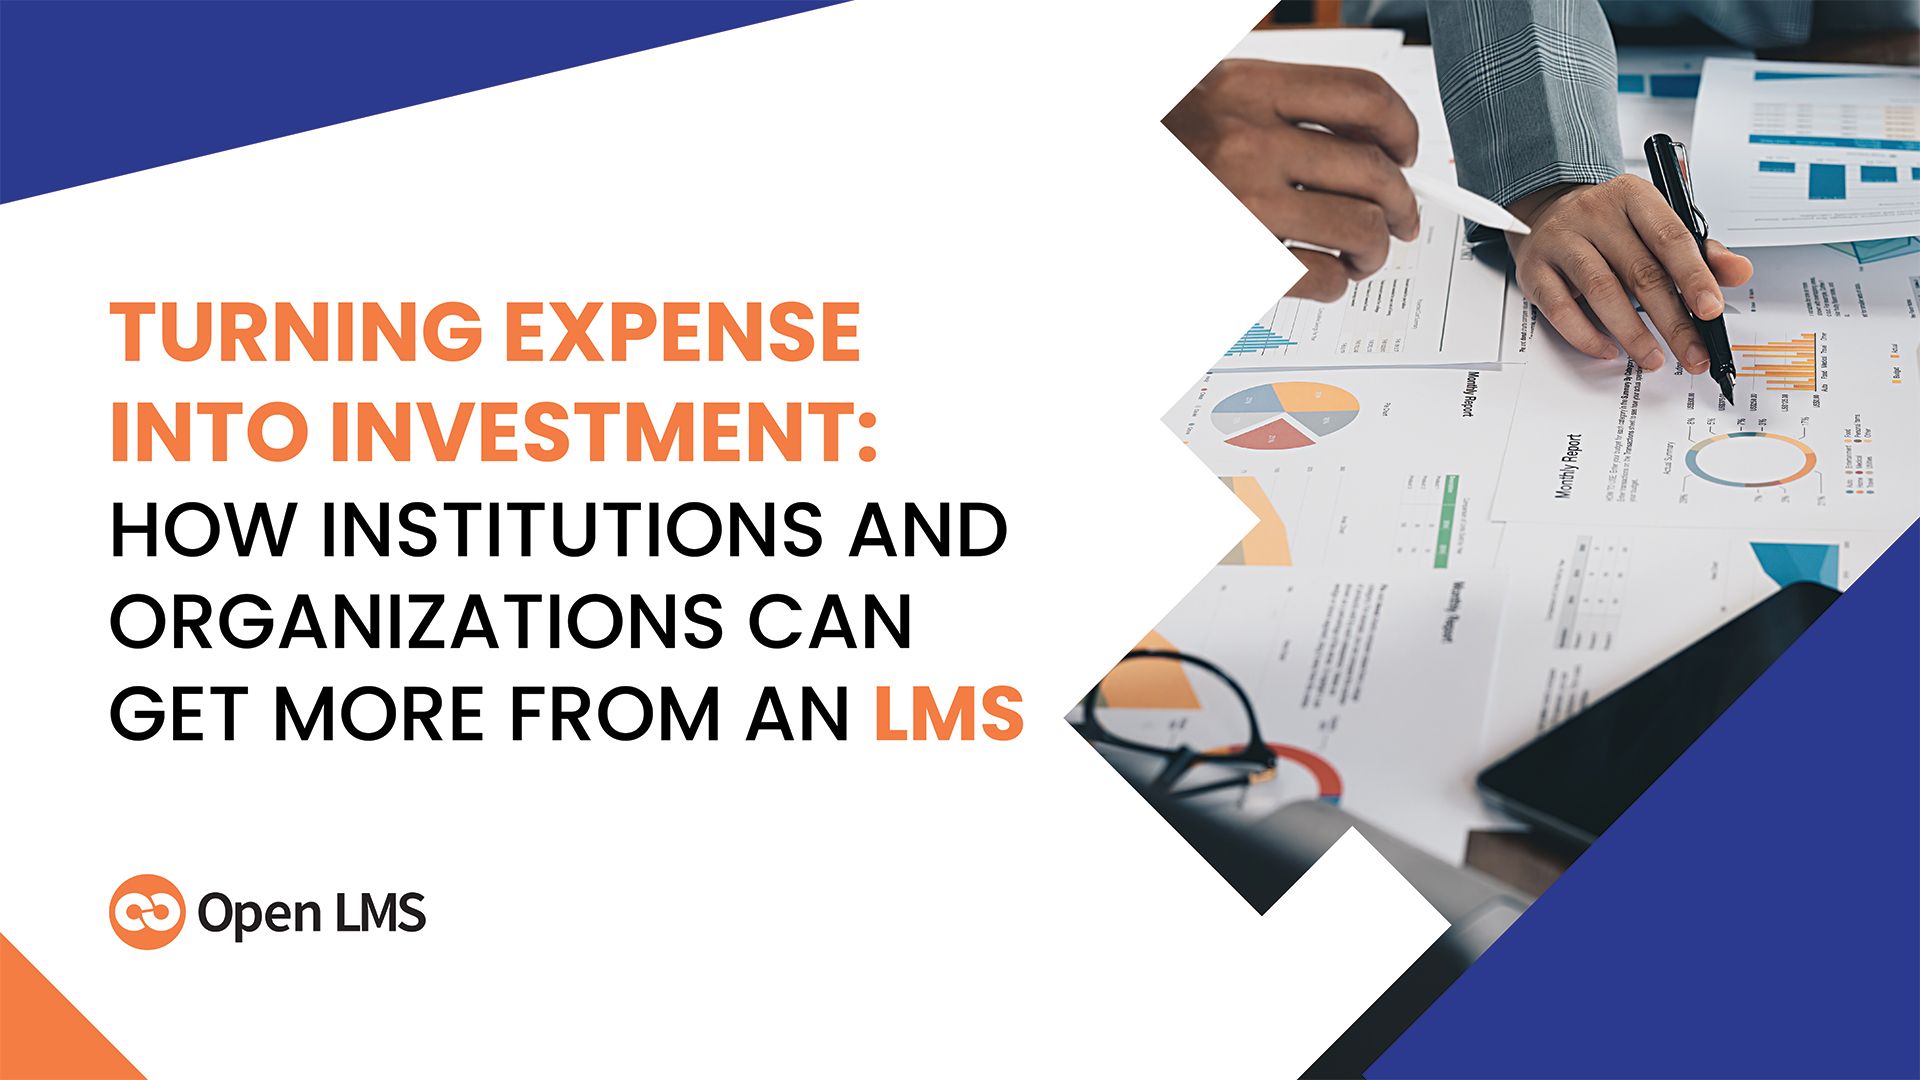 Turning Expense Into Investment: How Institutions and Organizations Can Get More From an LMS